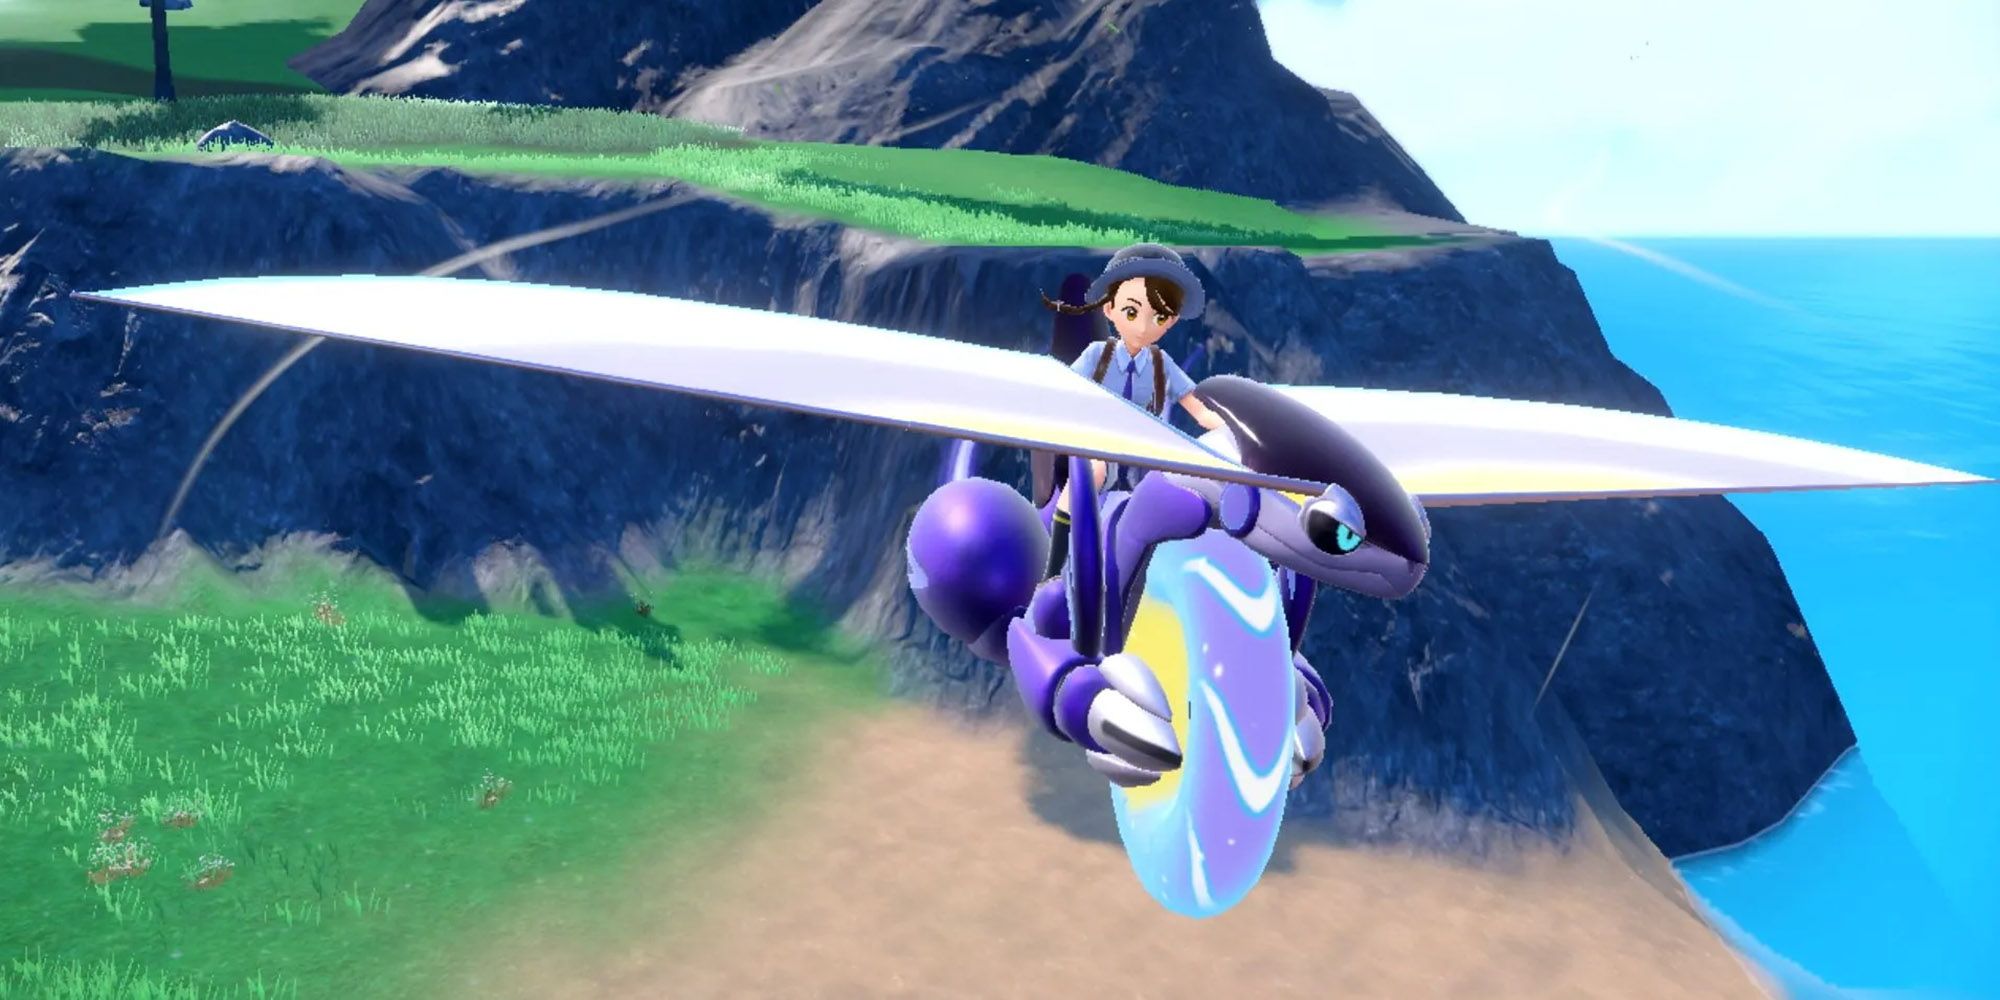 The player character flying on Miraidon in Pokémon Violet.